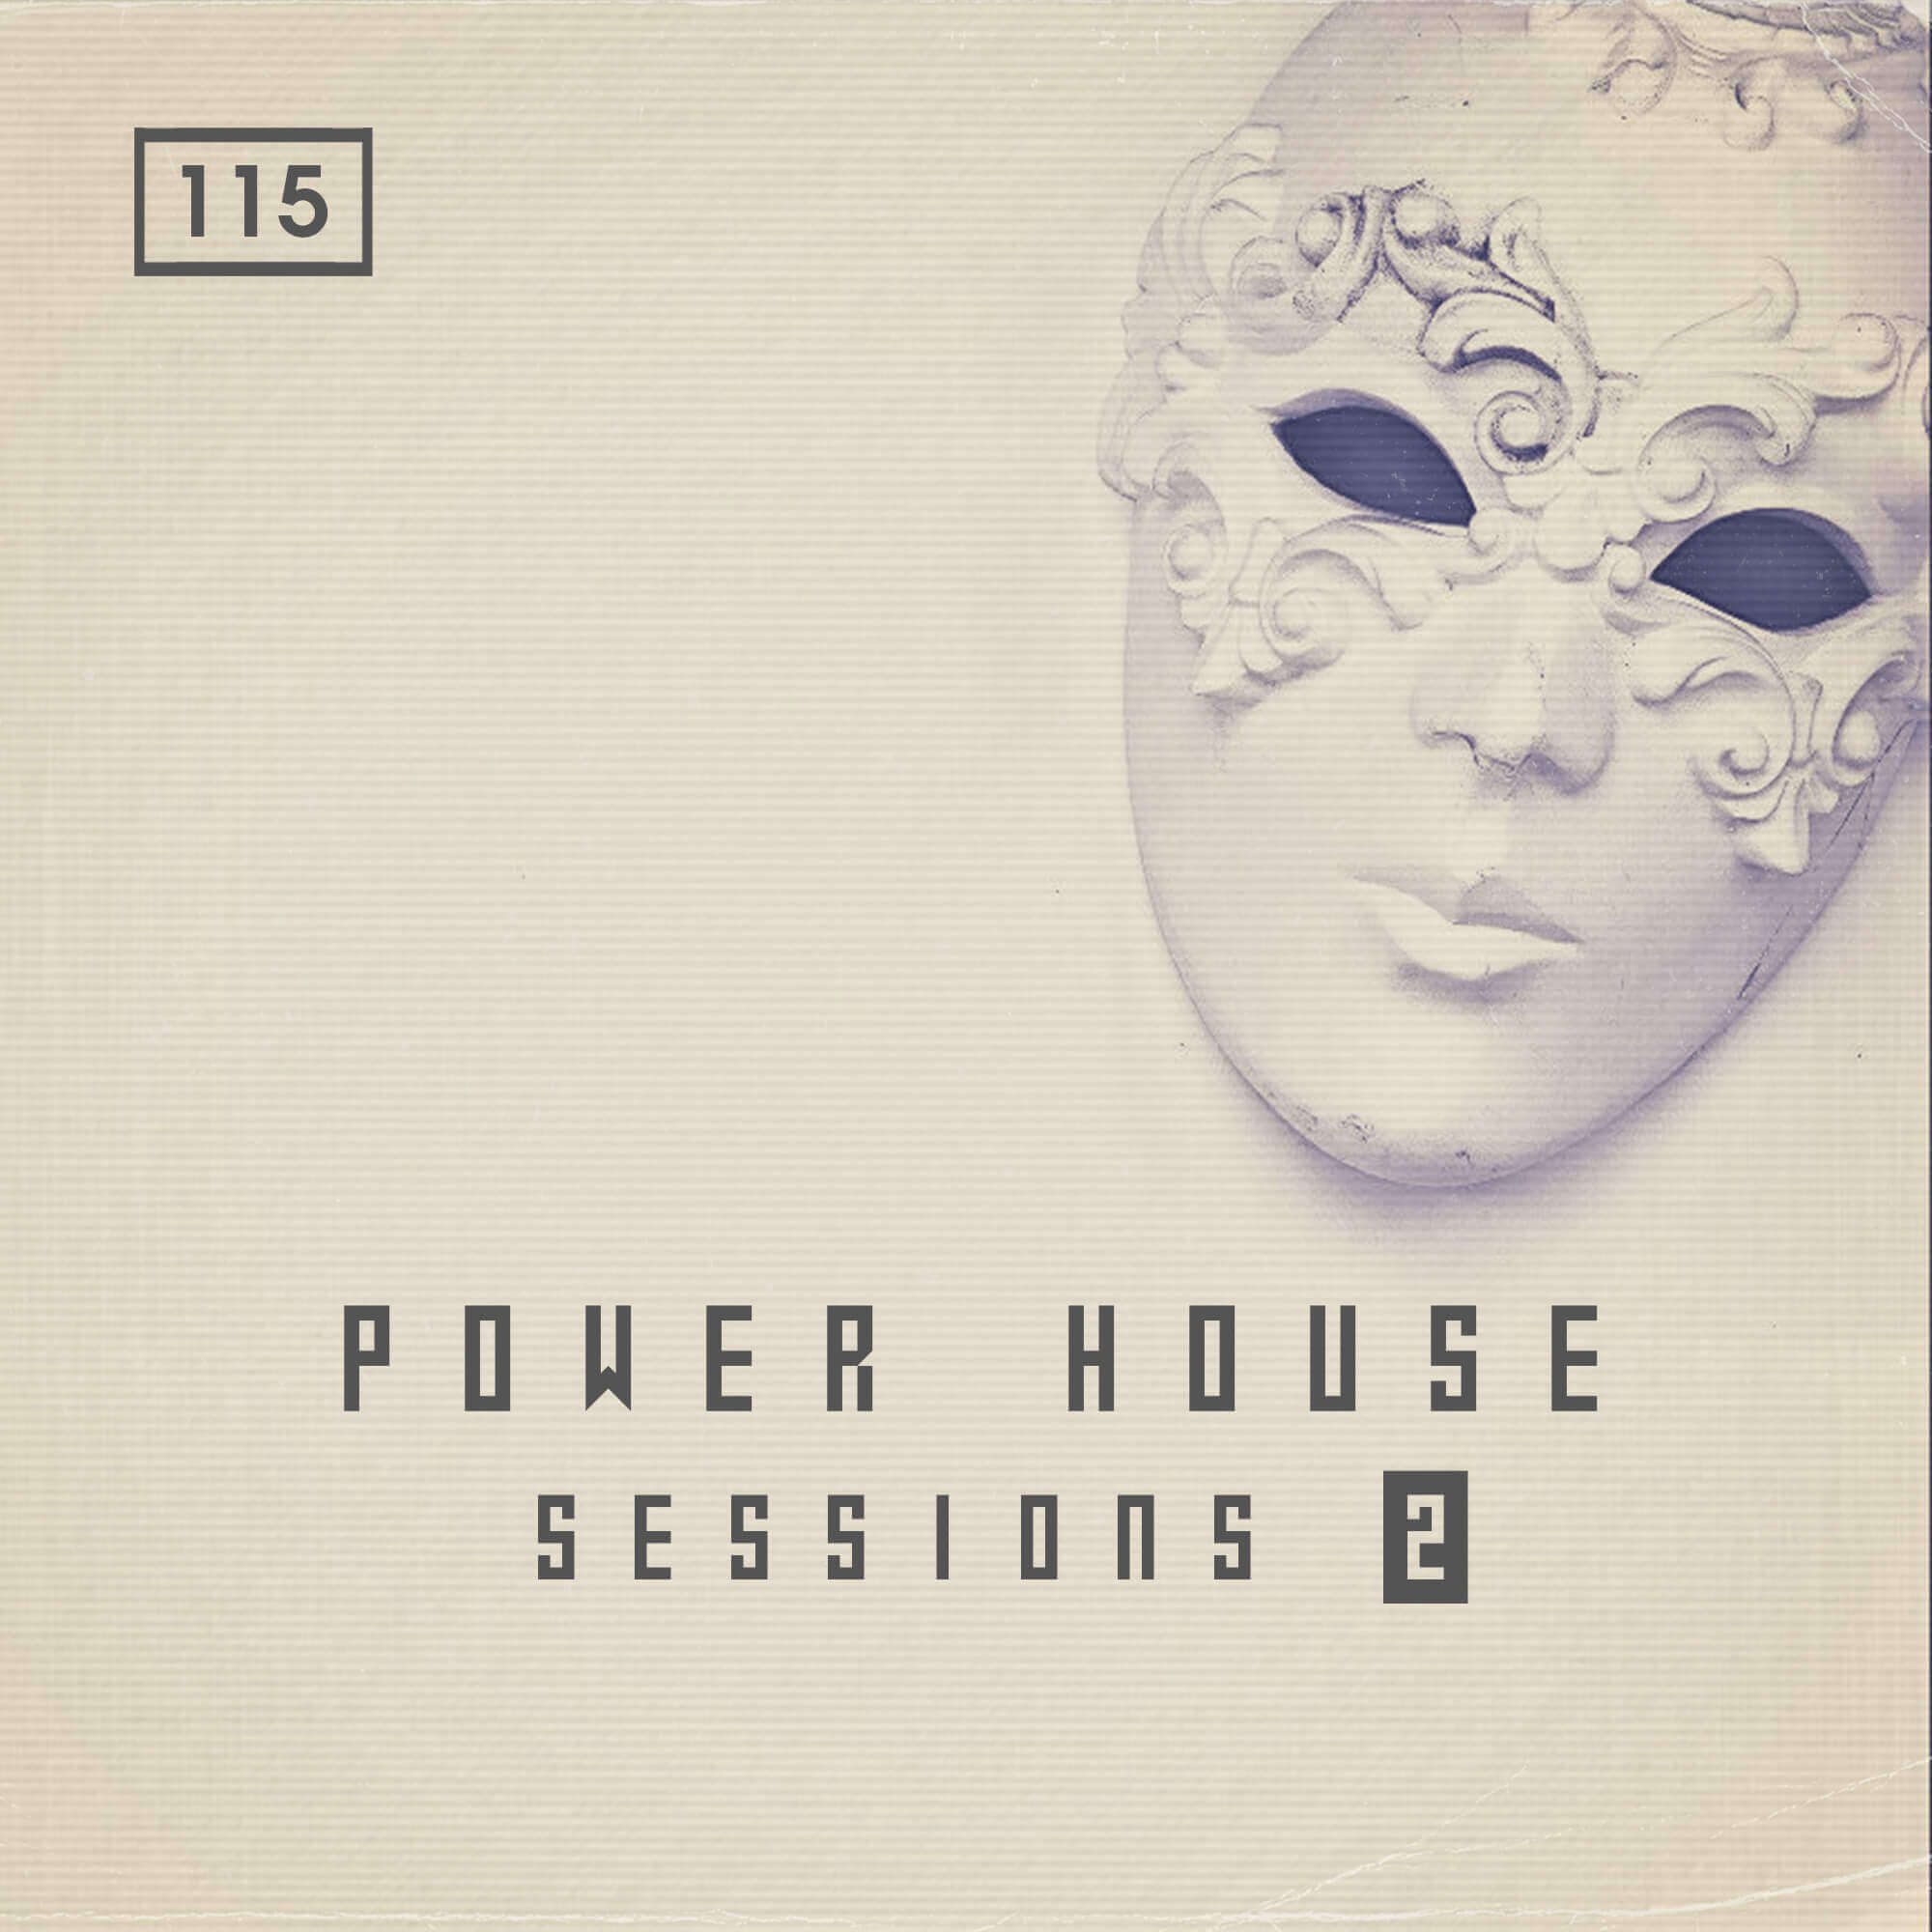 Power House Sessions 2